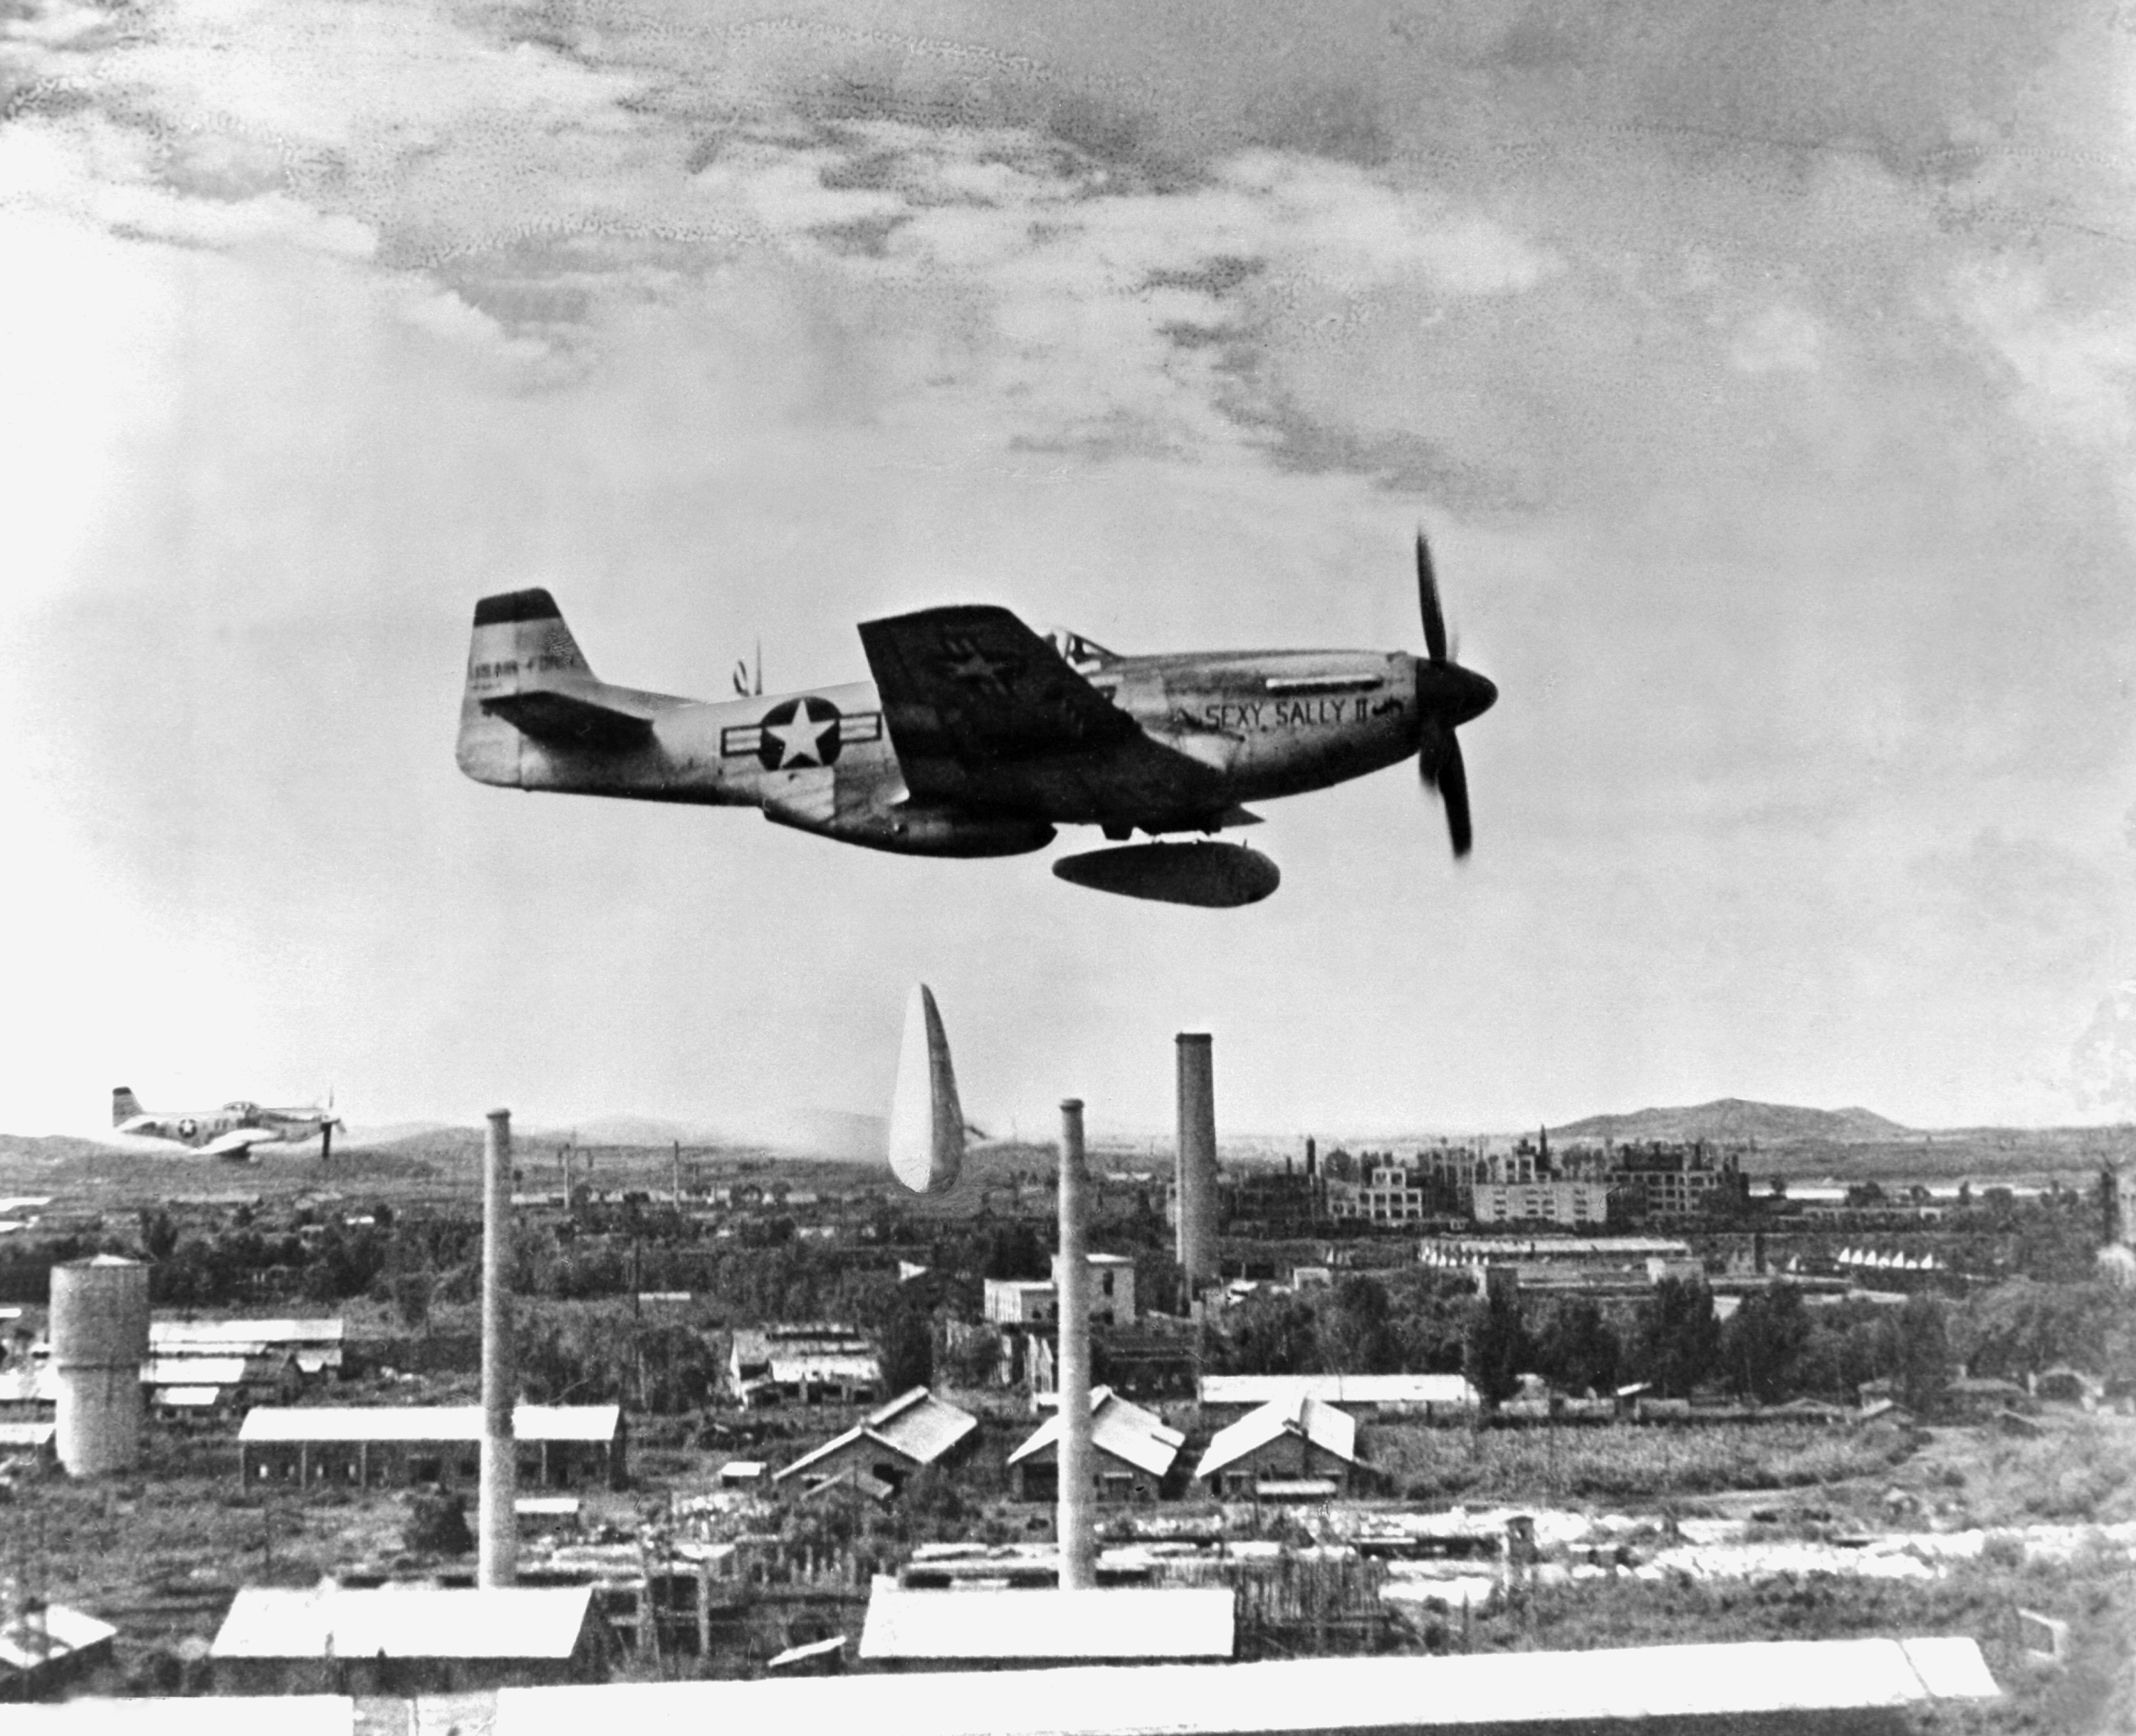 P-51 Mustang fighter of the US 5th Air Force dropping two napalm bombs in North Korea, 1 Jan 1951